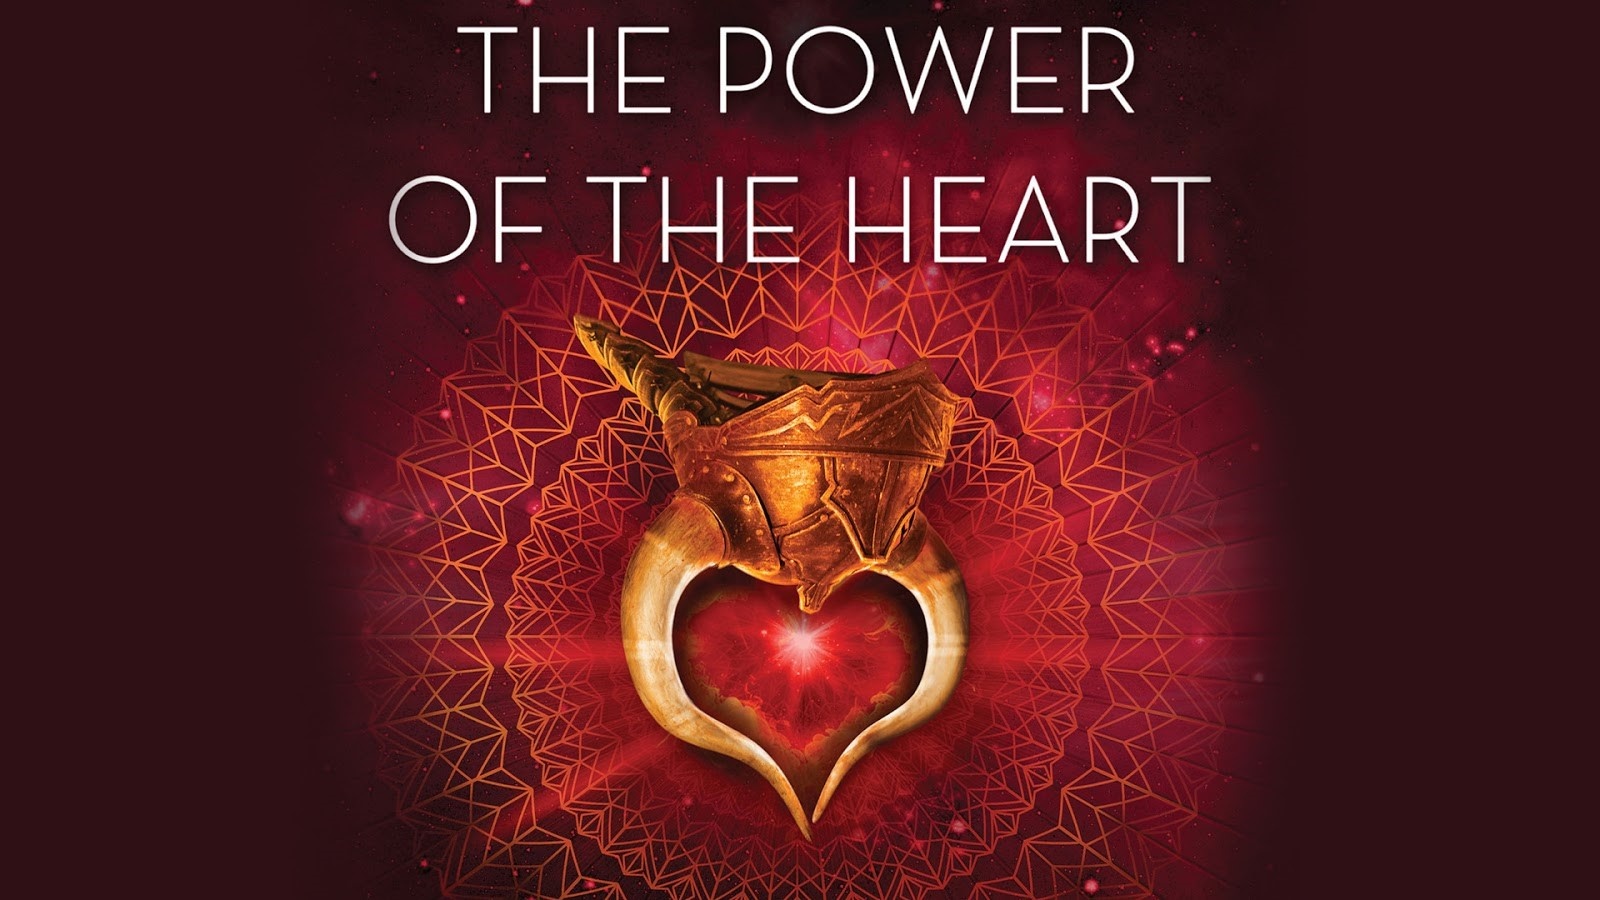 September Film Club: The Power of The Heart